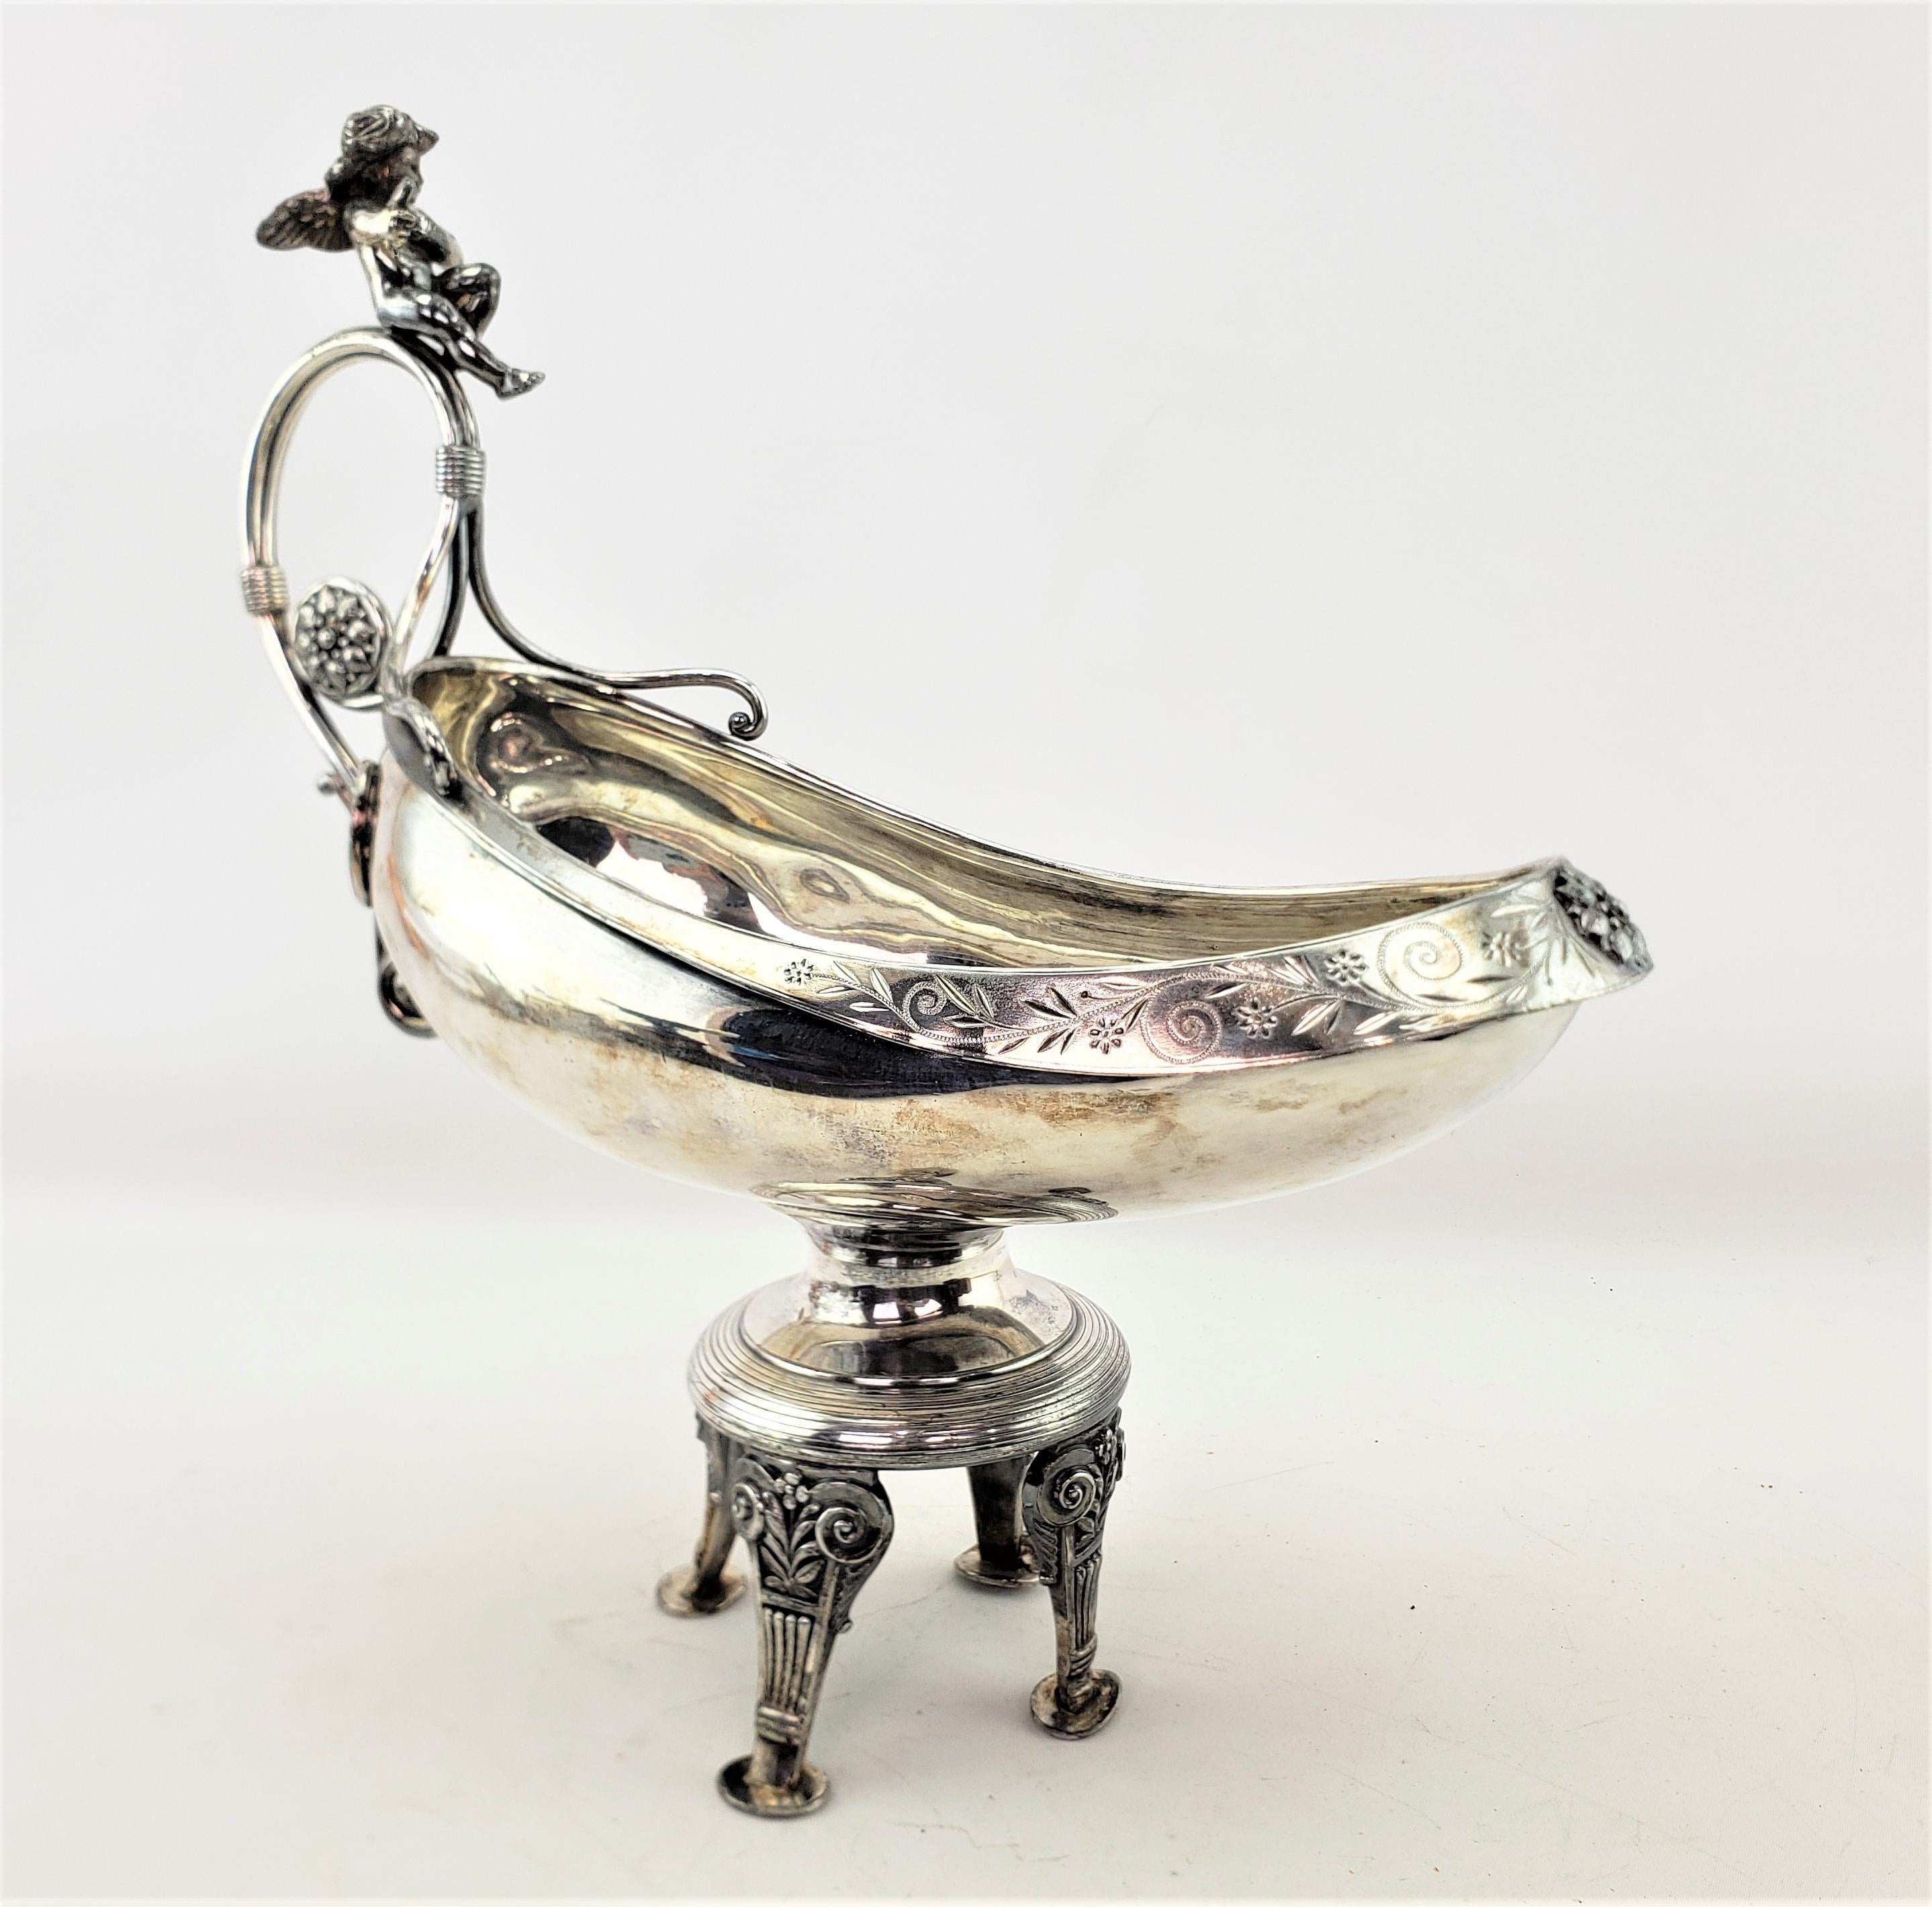 20th Century Antique Silver Plated Centerpiece Bowl with Figural Cherub & Floral Engraving For Sale